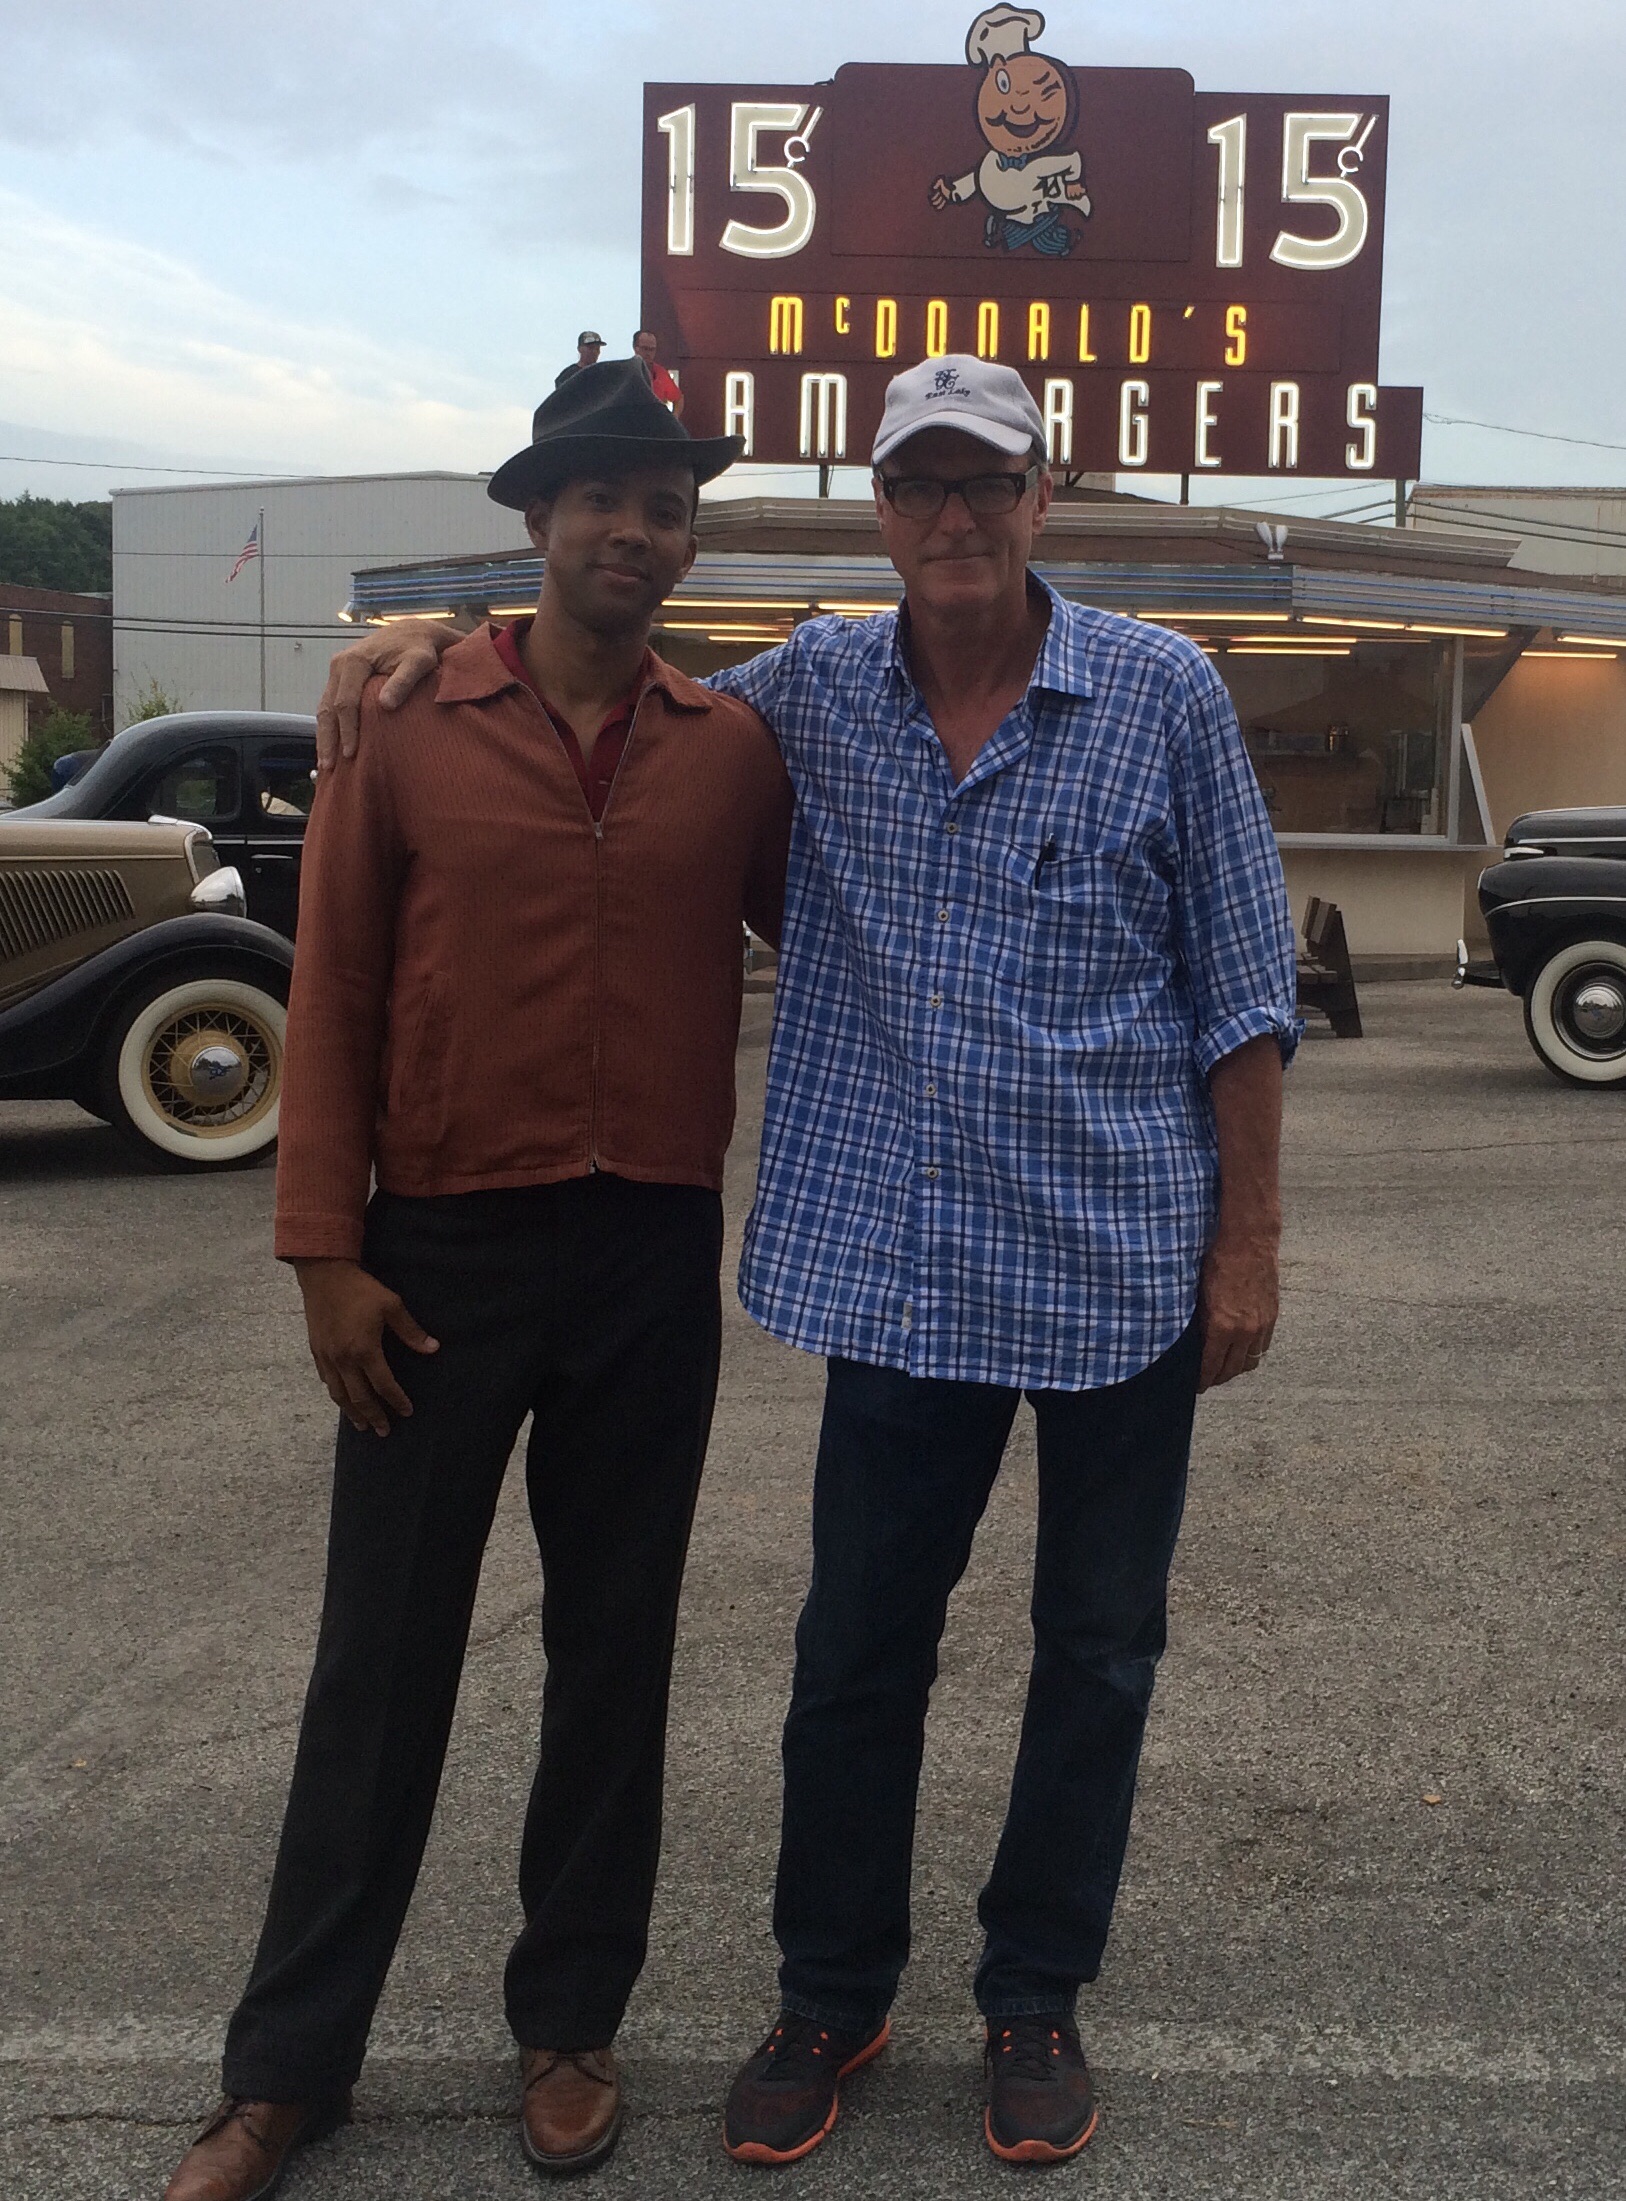 Chris Greene with Director John Lee Hancock on location for the film The Founder